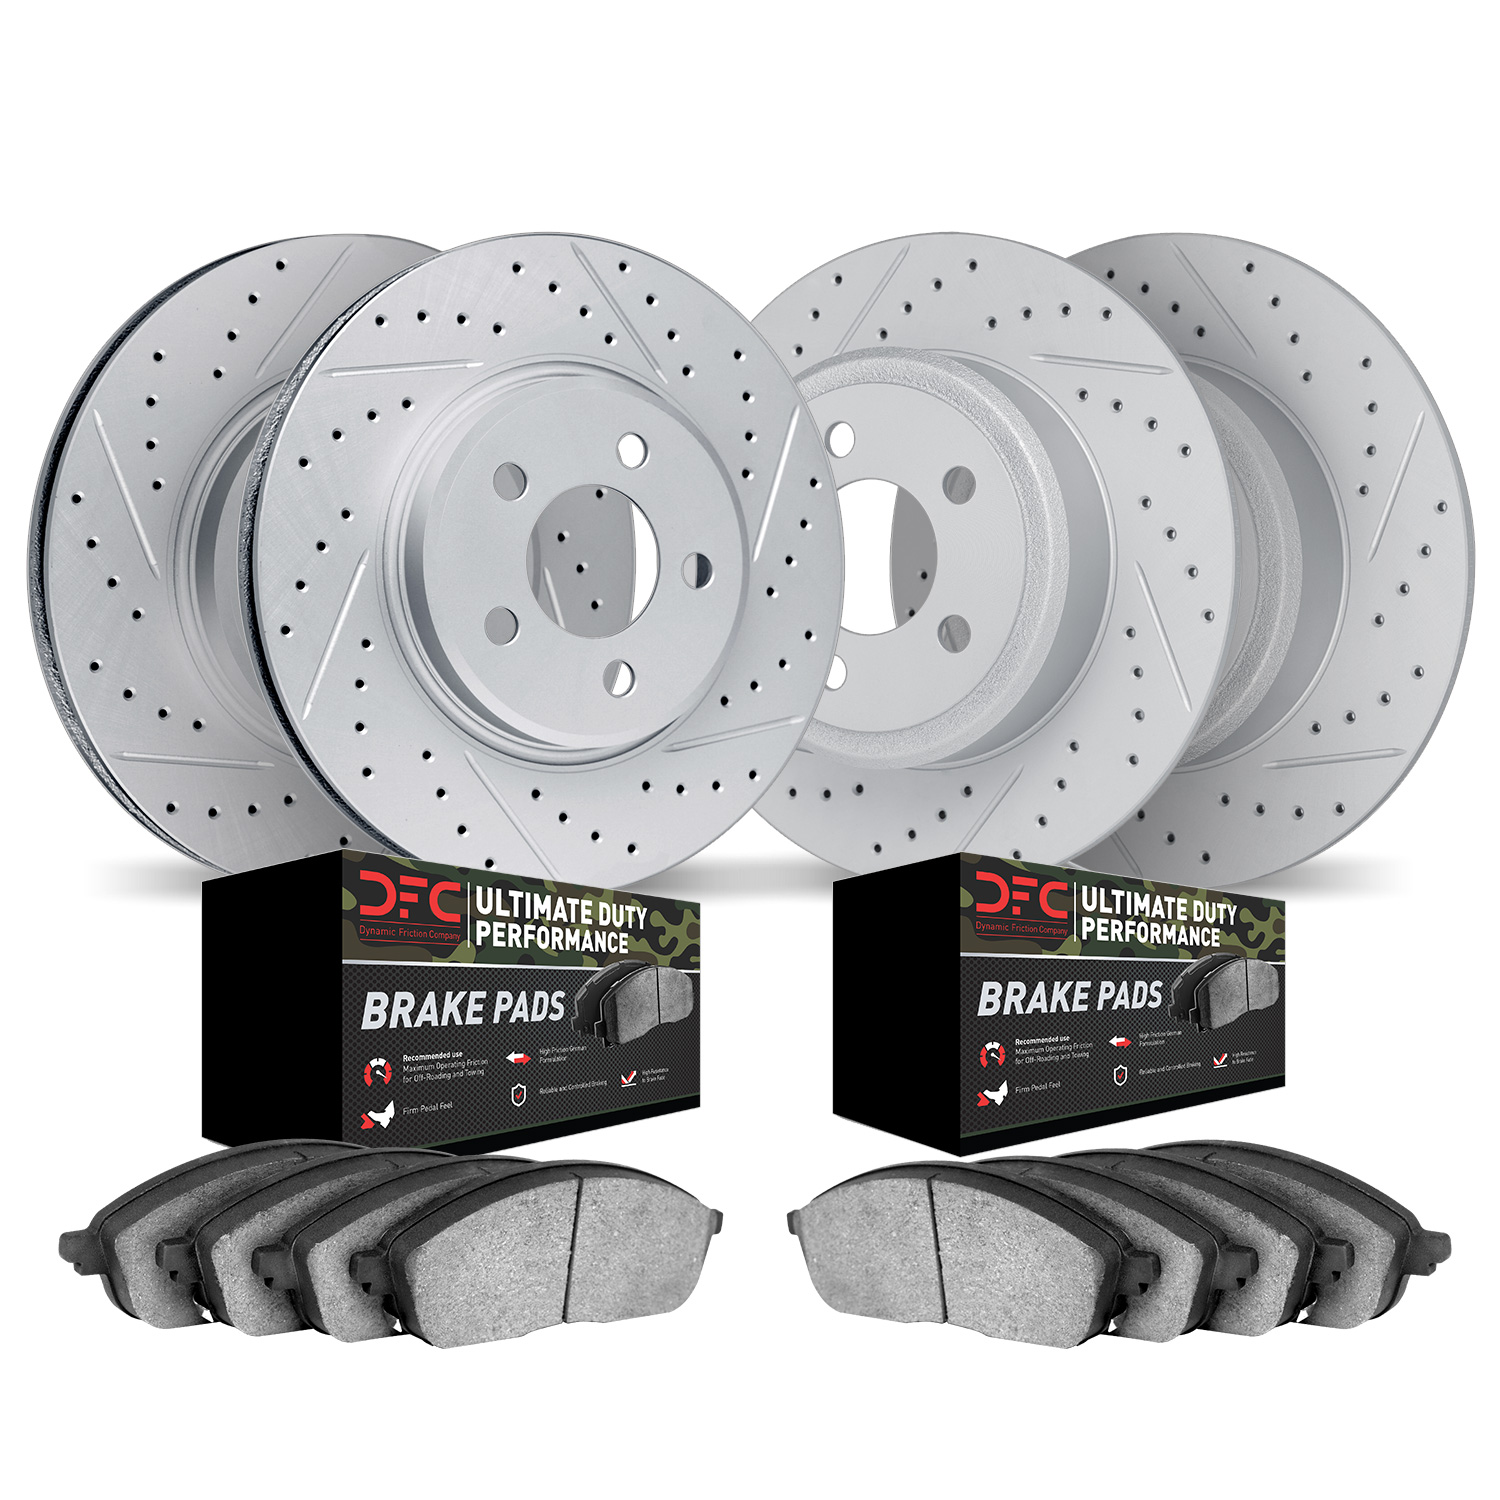 2404-54005 Geoperformance Drilled/Slotted Brake Rotors with Ultimate-Duty Brake Pads Kit, 1997-2004 Ford/Lincoln/Mercury/Mazda,